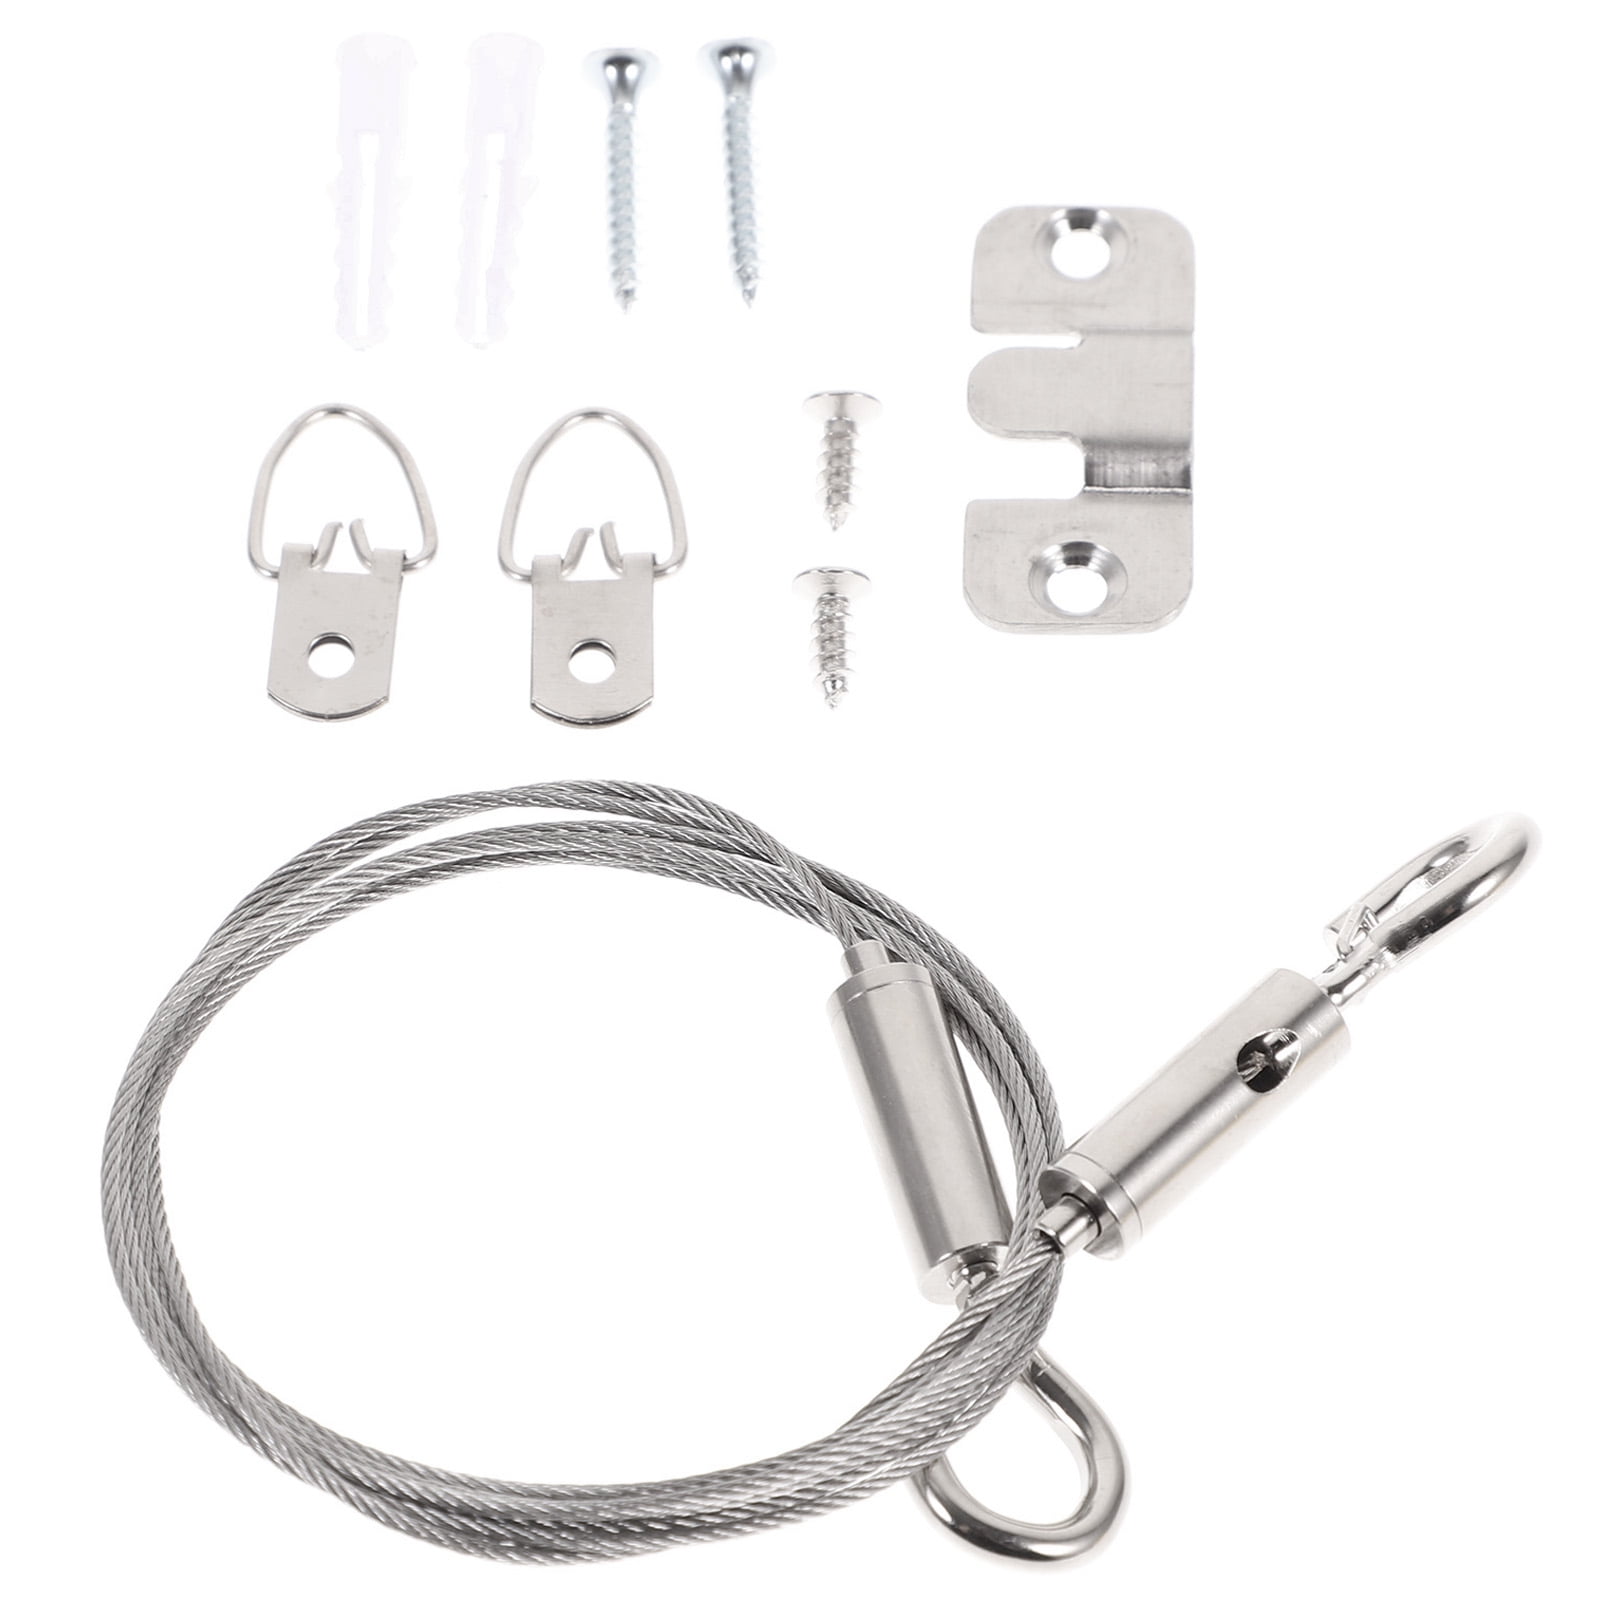 Heavy Duty Picture Wire Hanging Kit - D-Ring, Screws, Hanging Hooks,Level.  Supports up to 110 lbs 50+ Feet (15.25M) Stainless Steel Wire Hanger